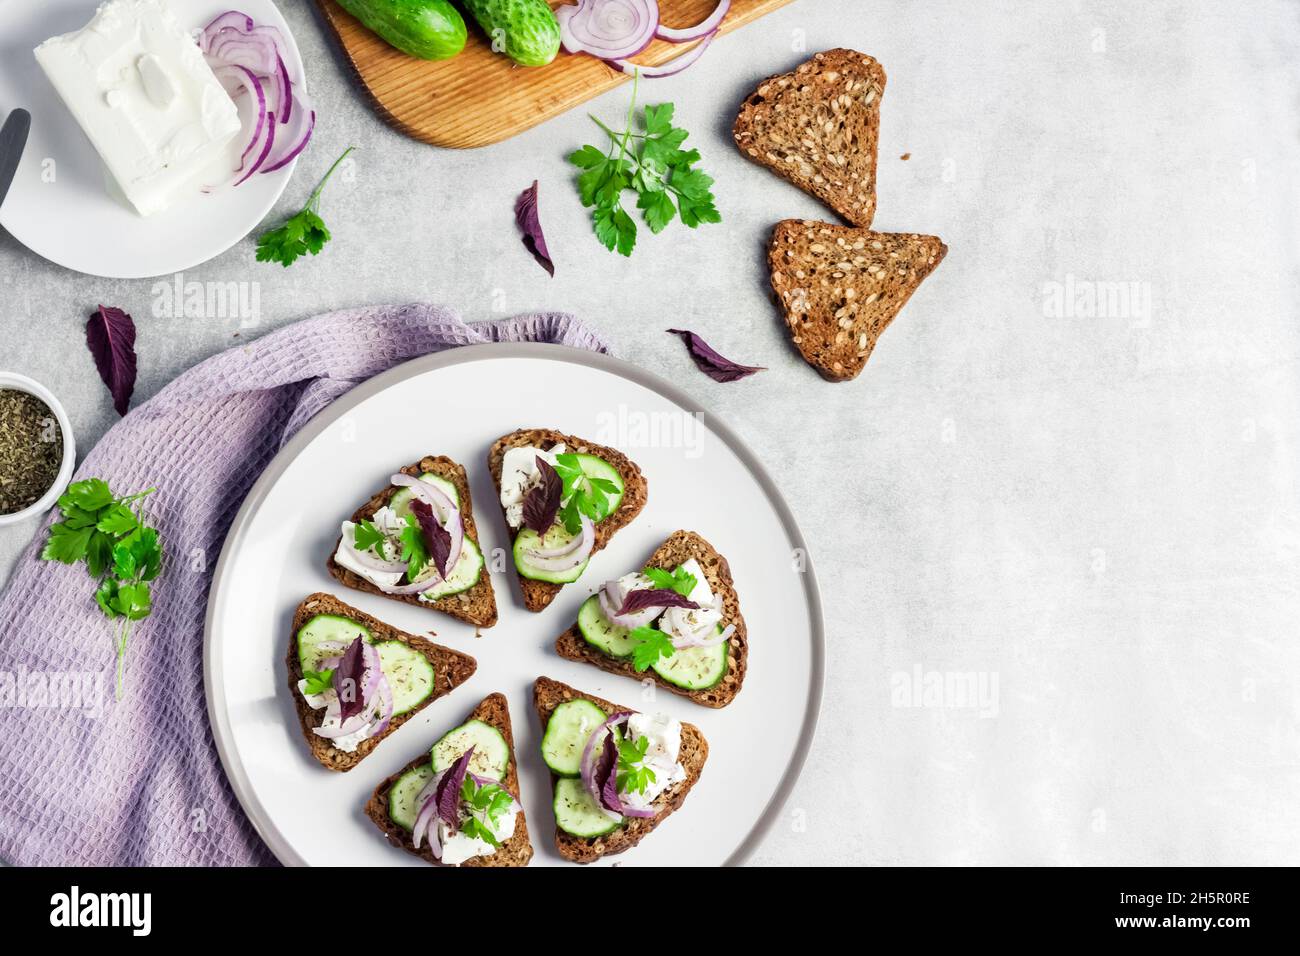 Canapes with toasted bread with sunflower and flax seeds, feta cheese, cucumber and onion Stock Photo